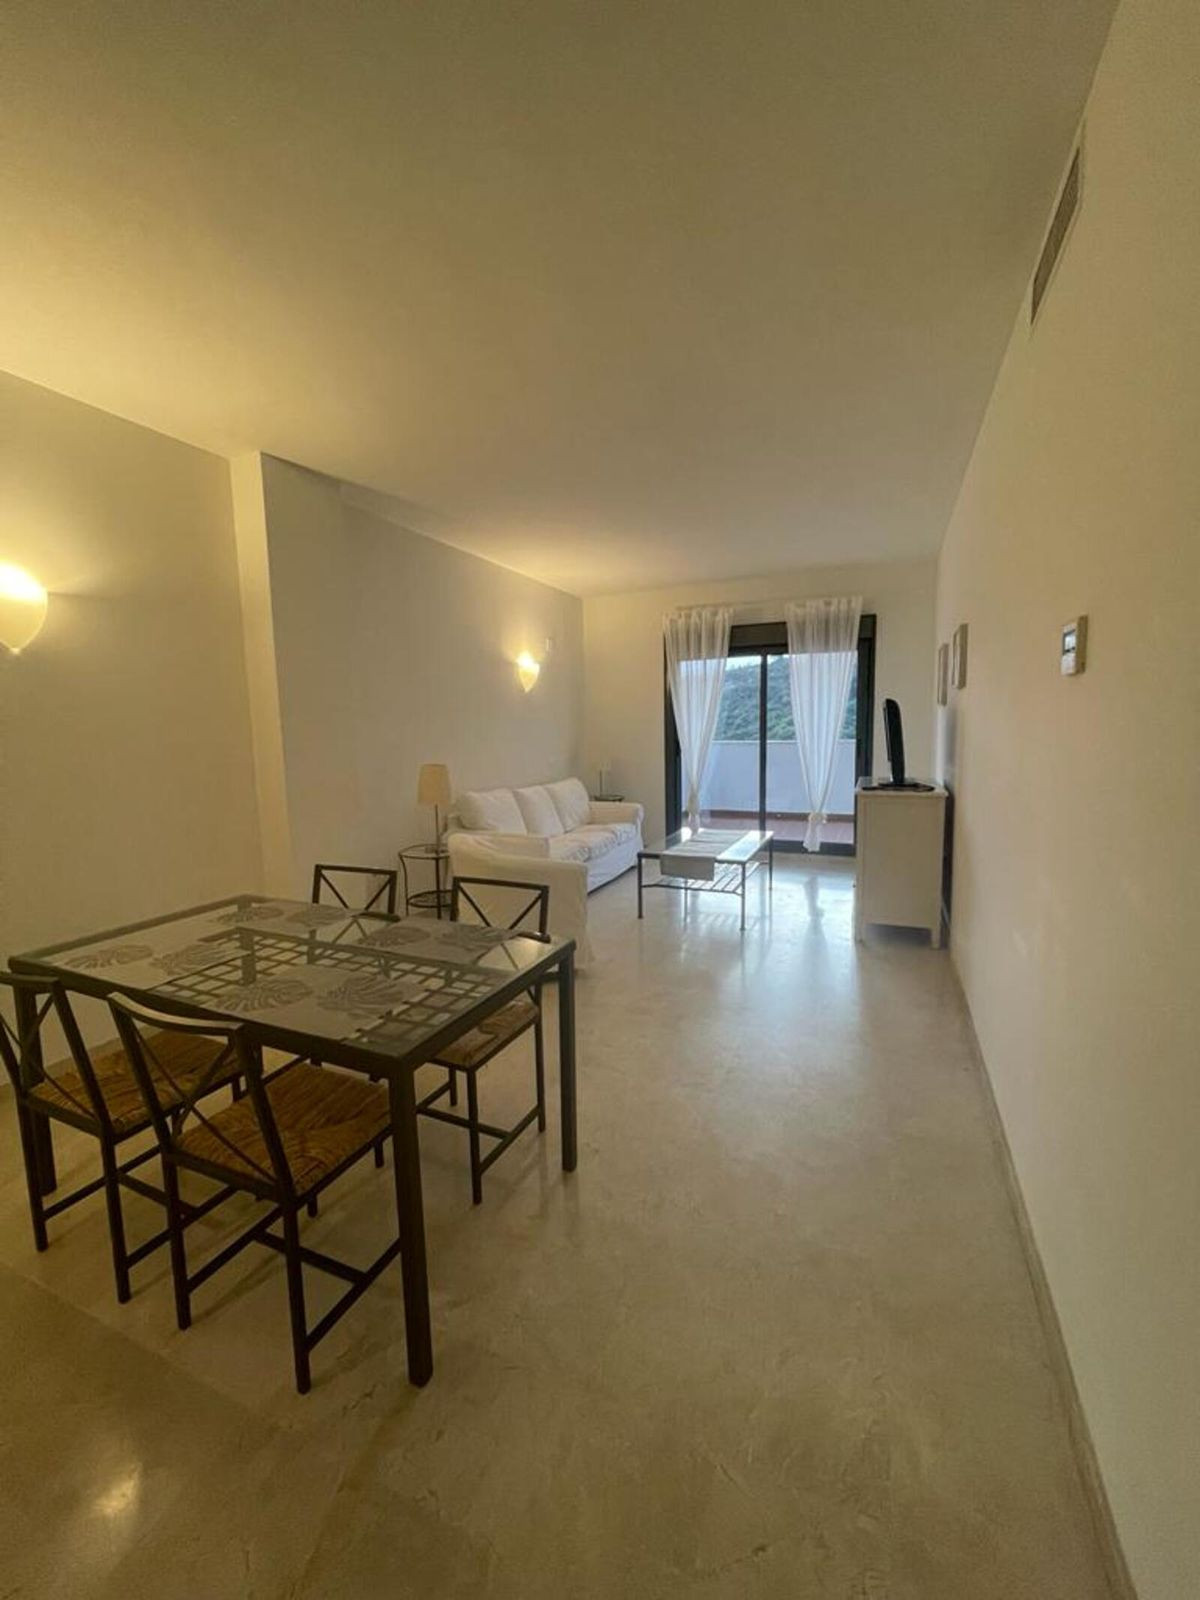 						Apartment  Middle Floor
																					for rent
																			 in Manilva
					